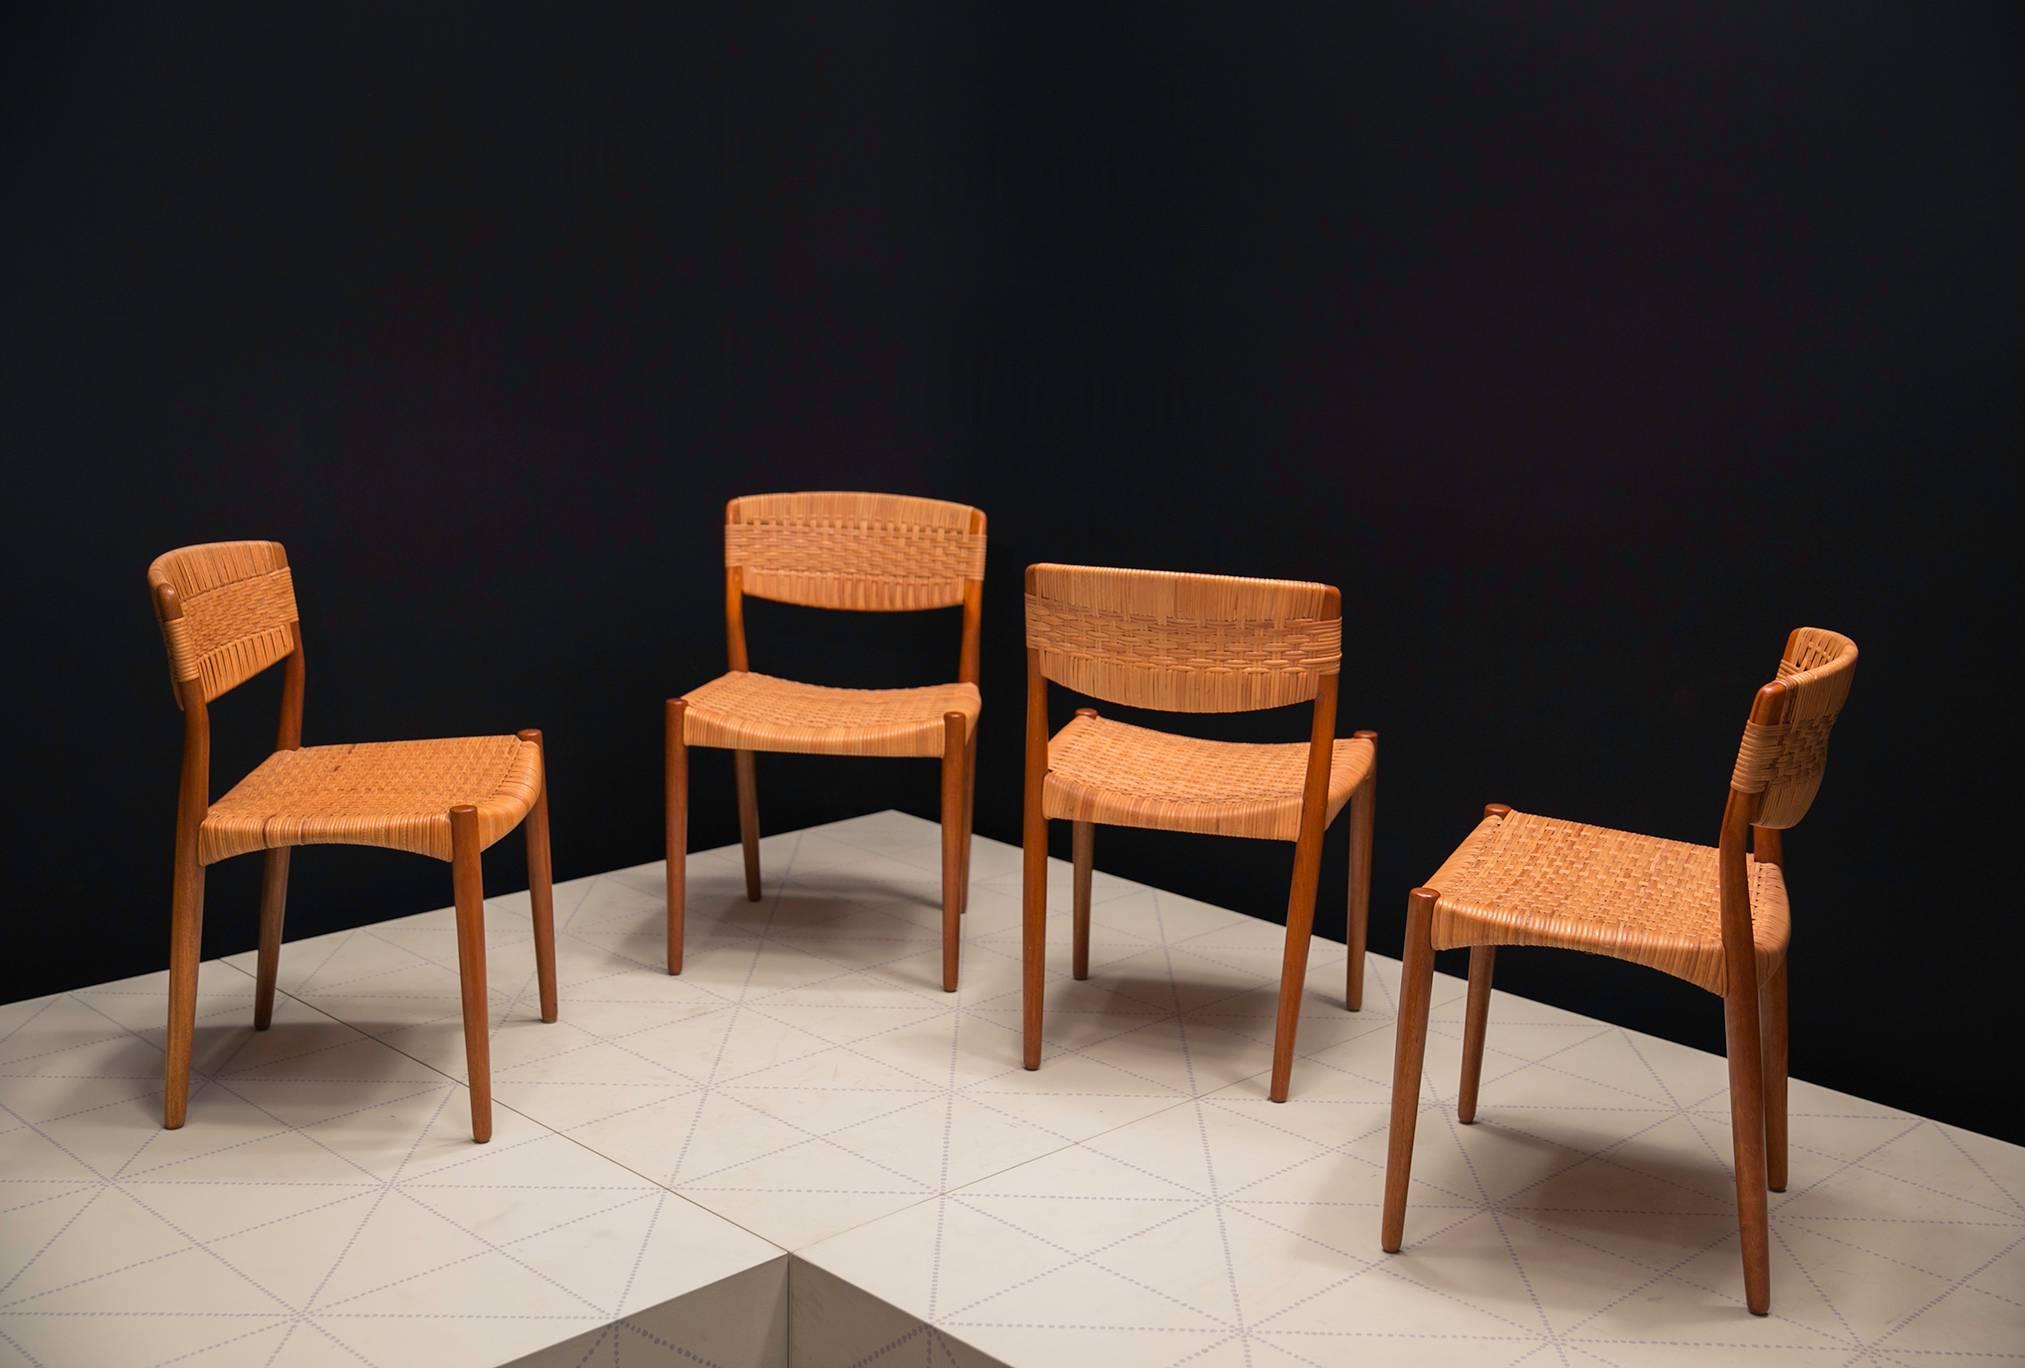 Set of Four Dining Chairs by Ejner Larsen and Axel Bender Madsen by Willy Beck. Ejner Larsen and Axel Bender Madsen first exhibited this chair at the 1955 Copenhagen Cabinetmakers' Guild Exhibition on the stand of master cabinetmaker Willy Beck.